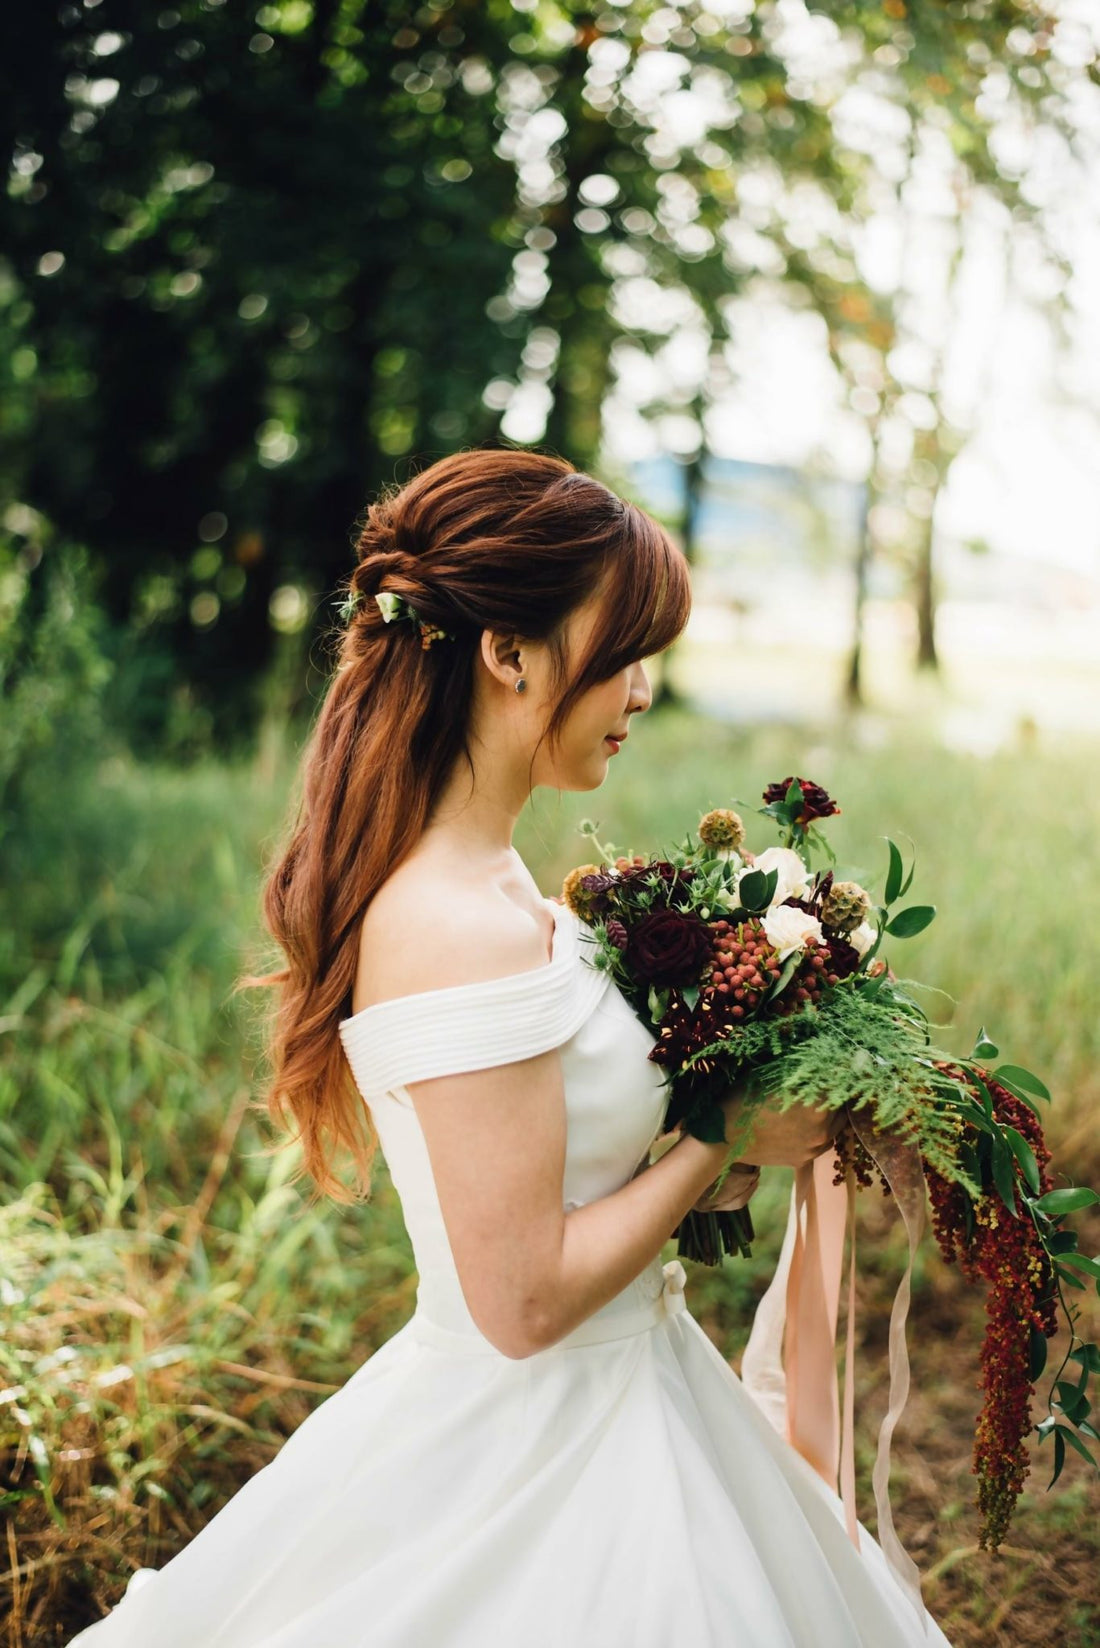 OUR FAVORITE HAIR STYLES FOR BRIDES